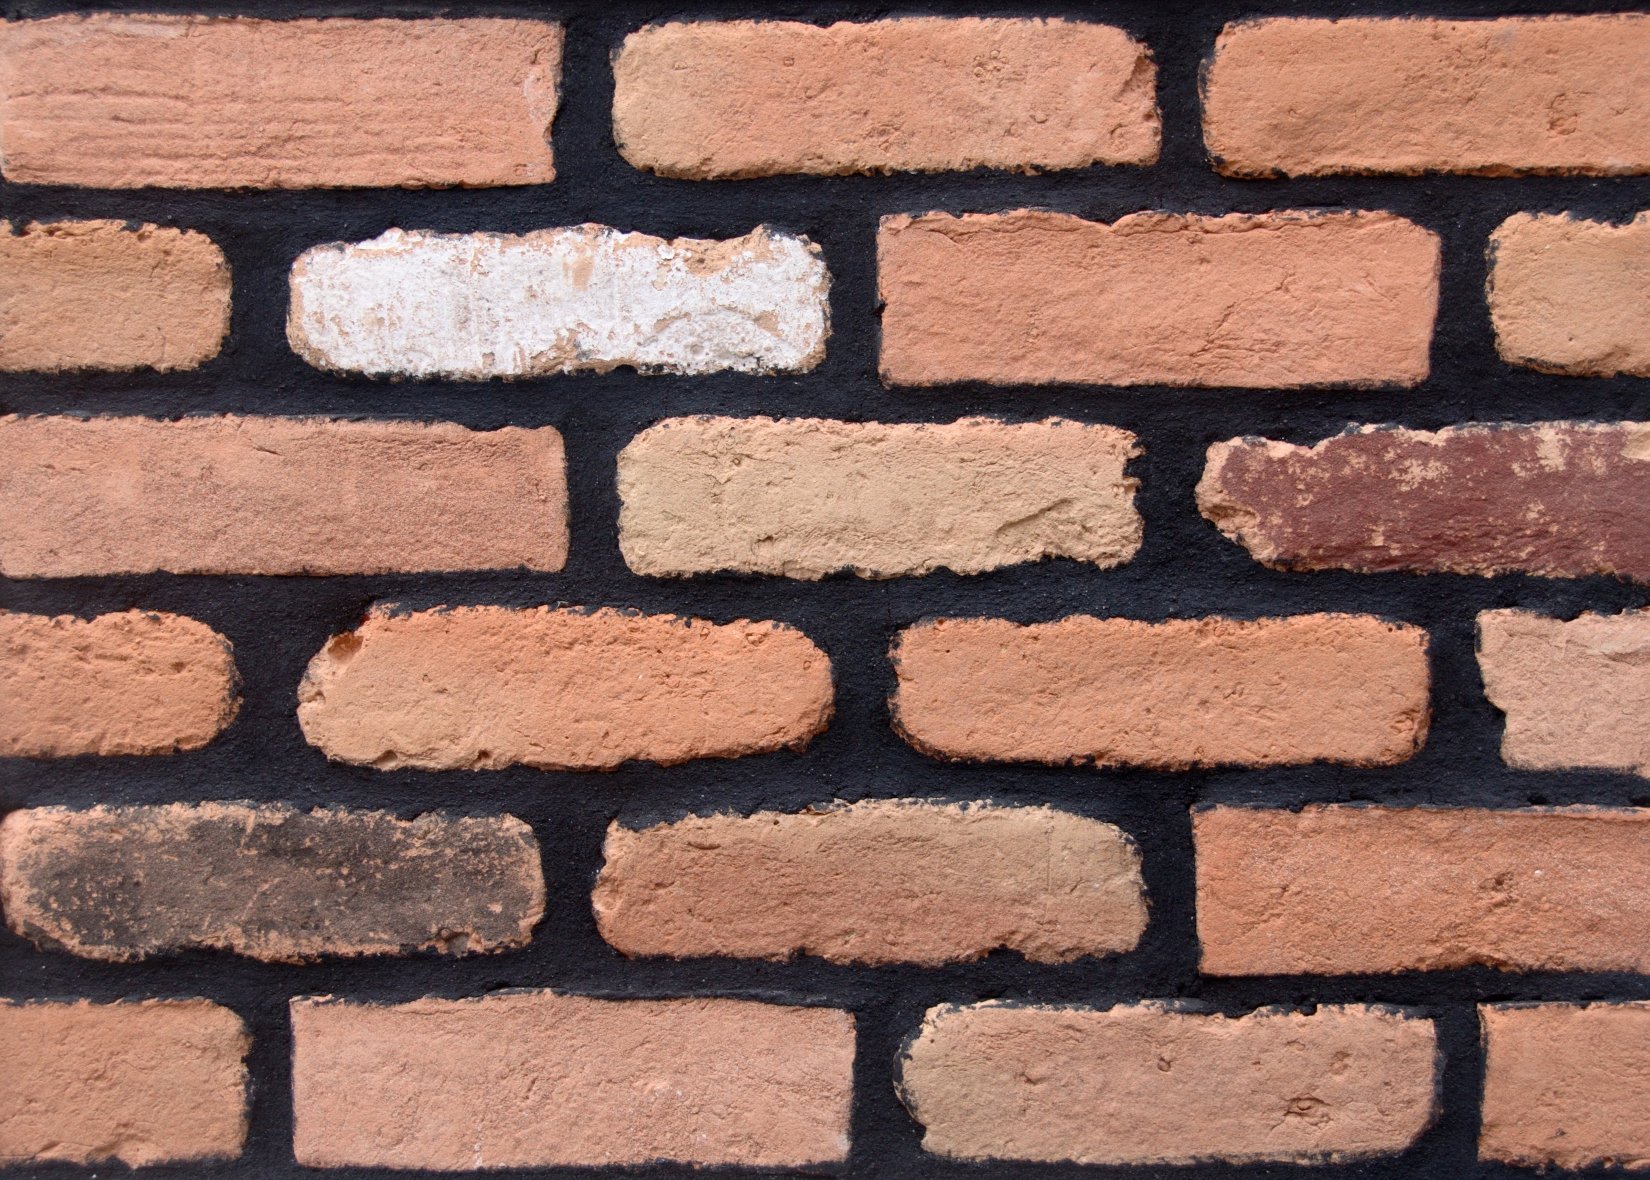 Brick Texture, Abstract, Stability, Solid, Row, HQ Photo